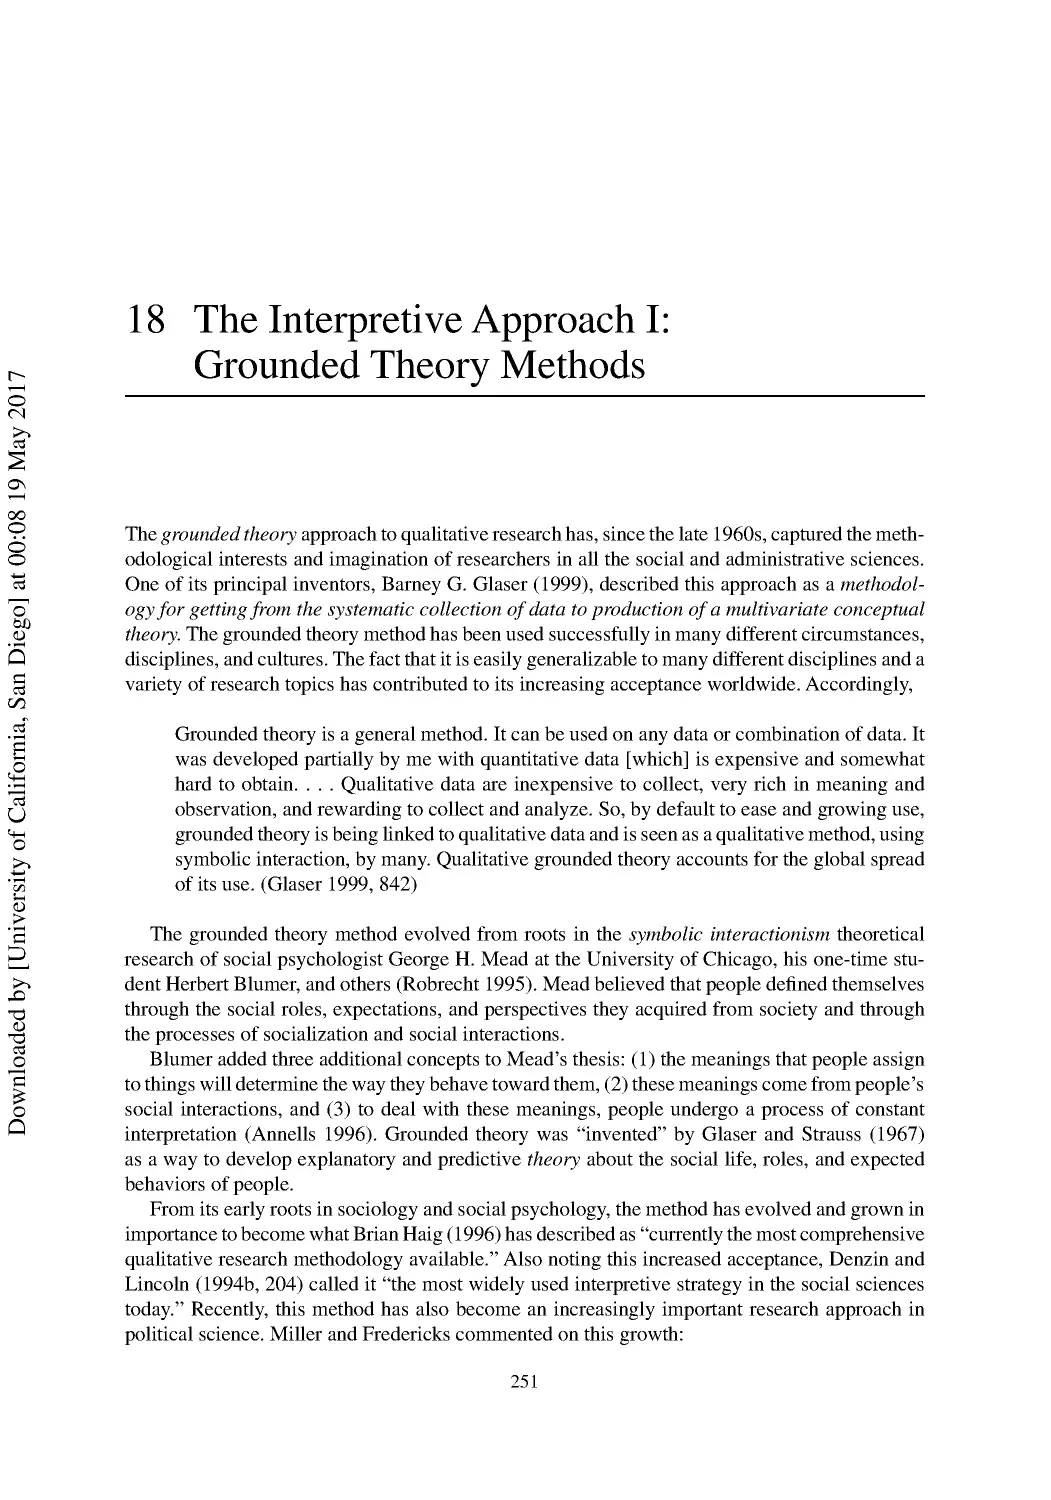 18 The Interpretive Approach I: Grounded Theory Methods